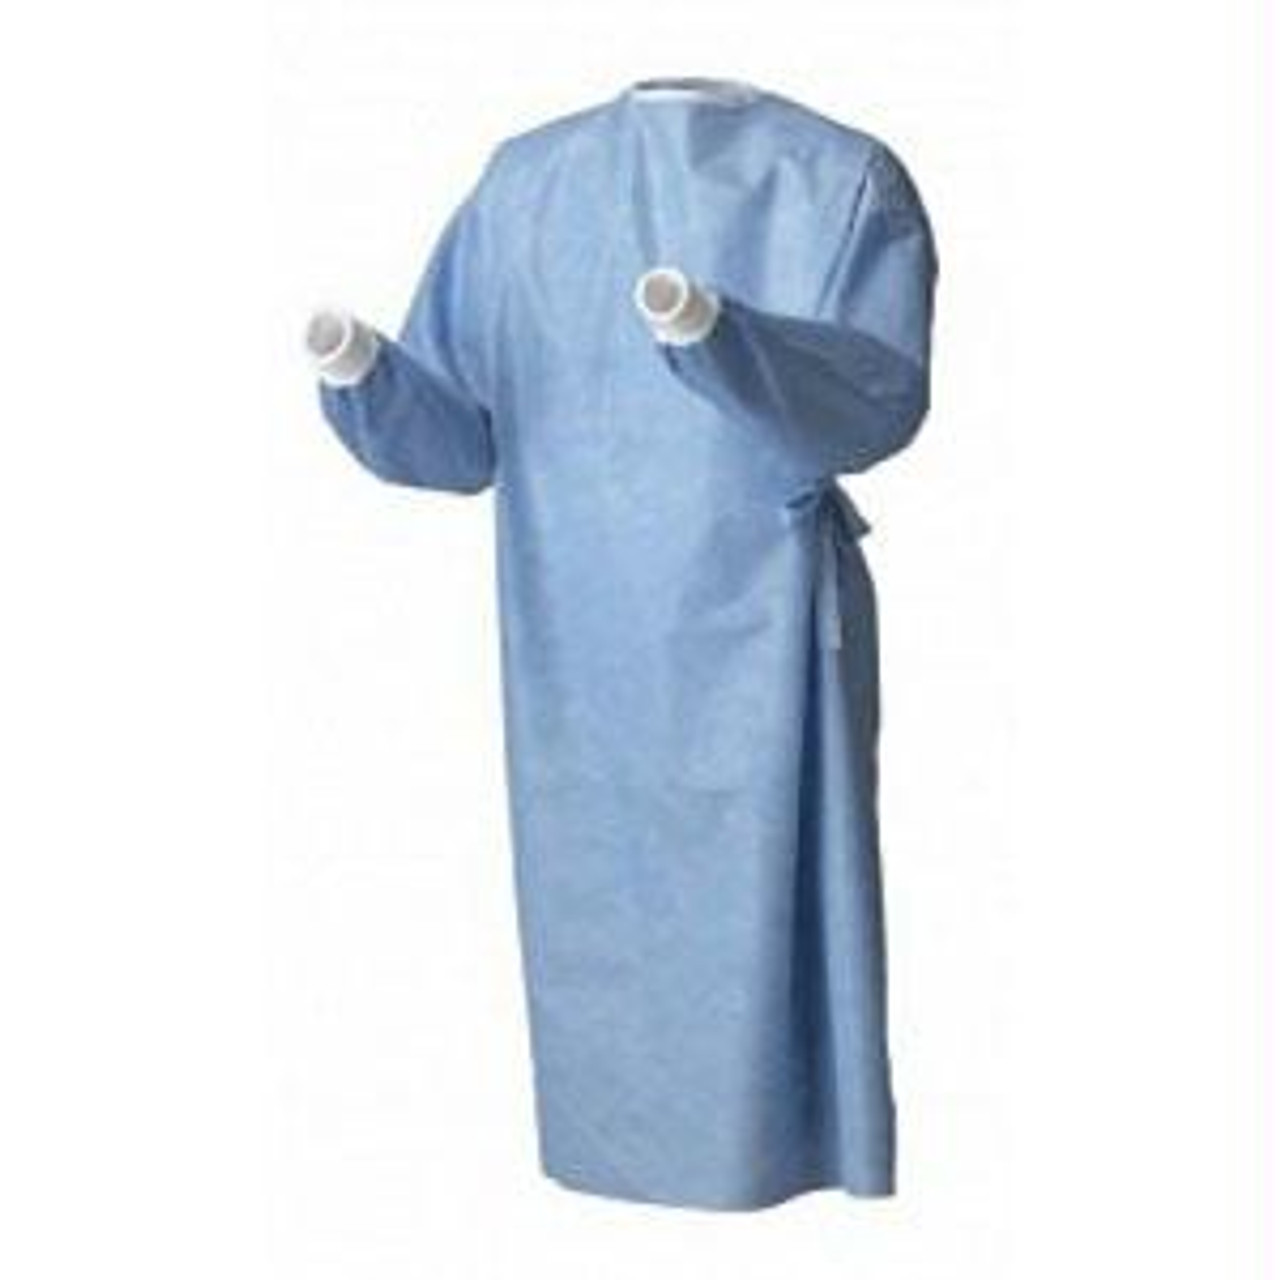 Amazon.com: Sol-Millennium Sterile Surgical Gown, AAMI Level 3, 2X-Large  Size, Sterile Wrap with Hand Towel, Pack of 50 : Industrial & Scientific